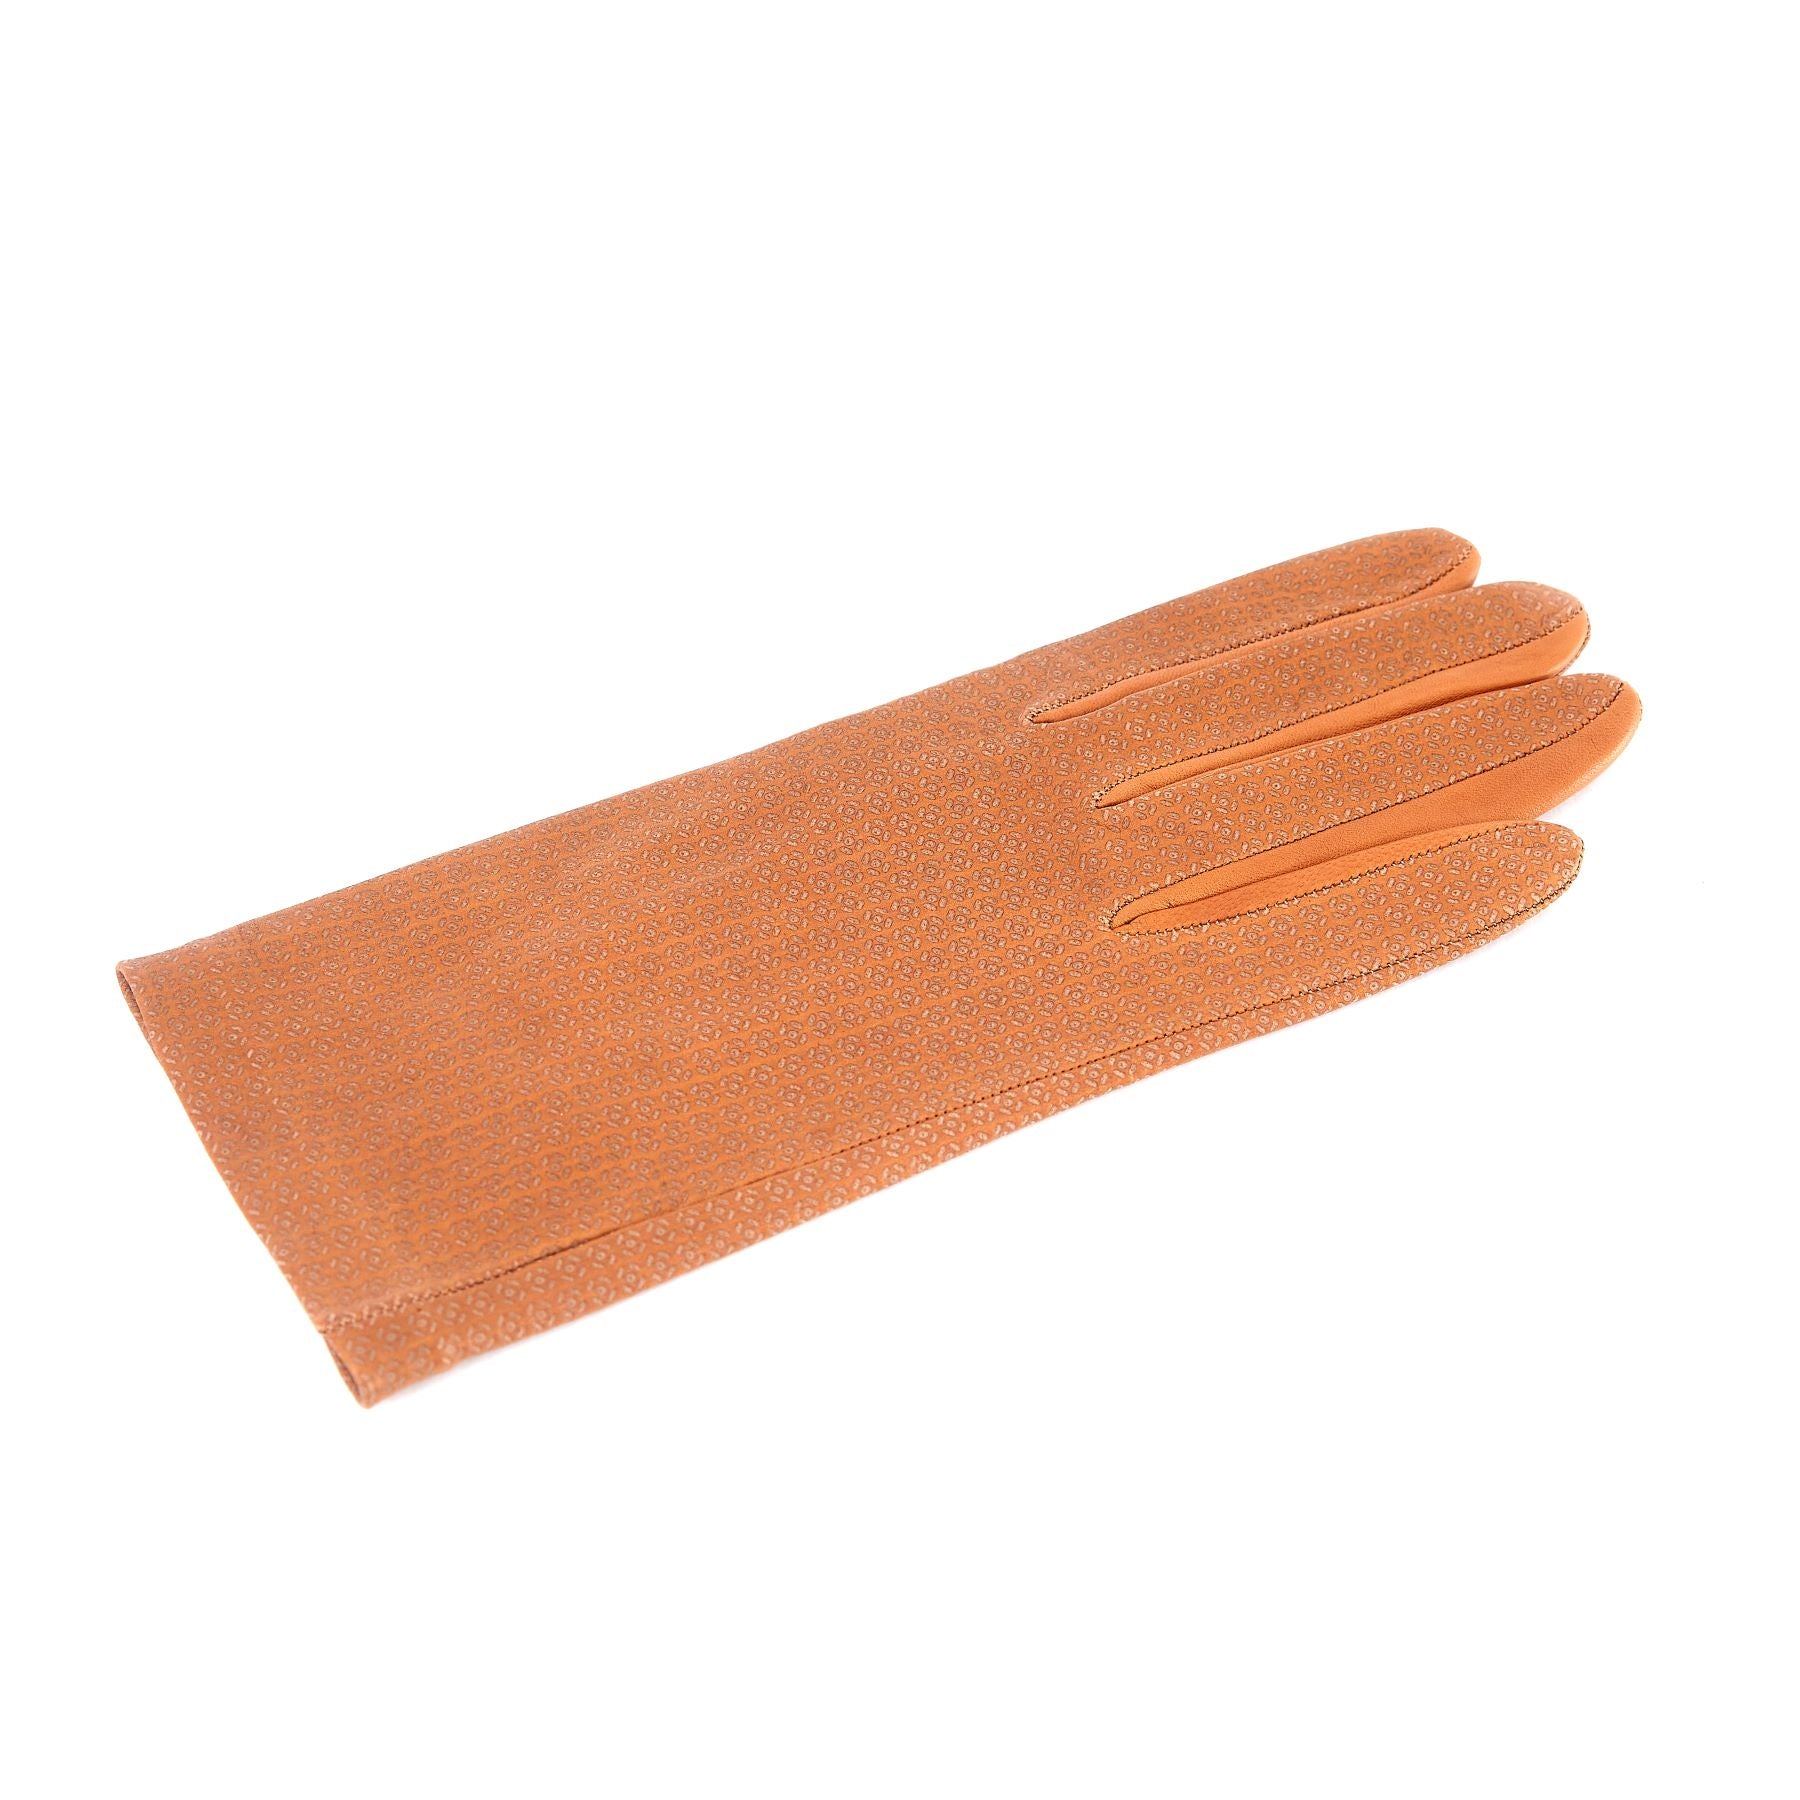 Women's unlined camel nappa leather gloves with all over laser cut detail